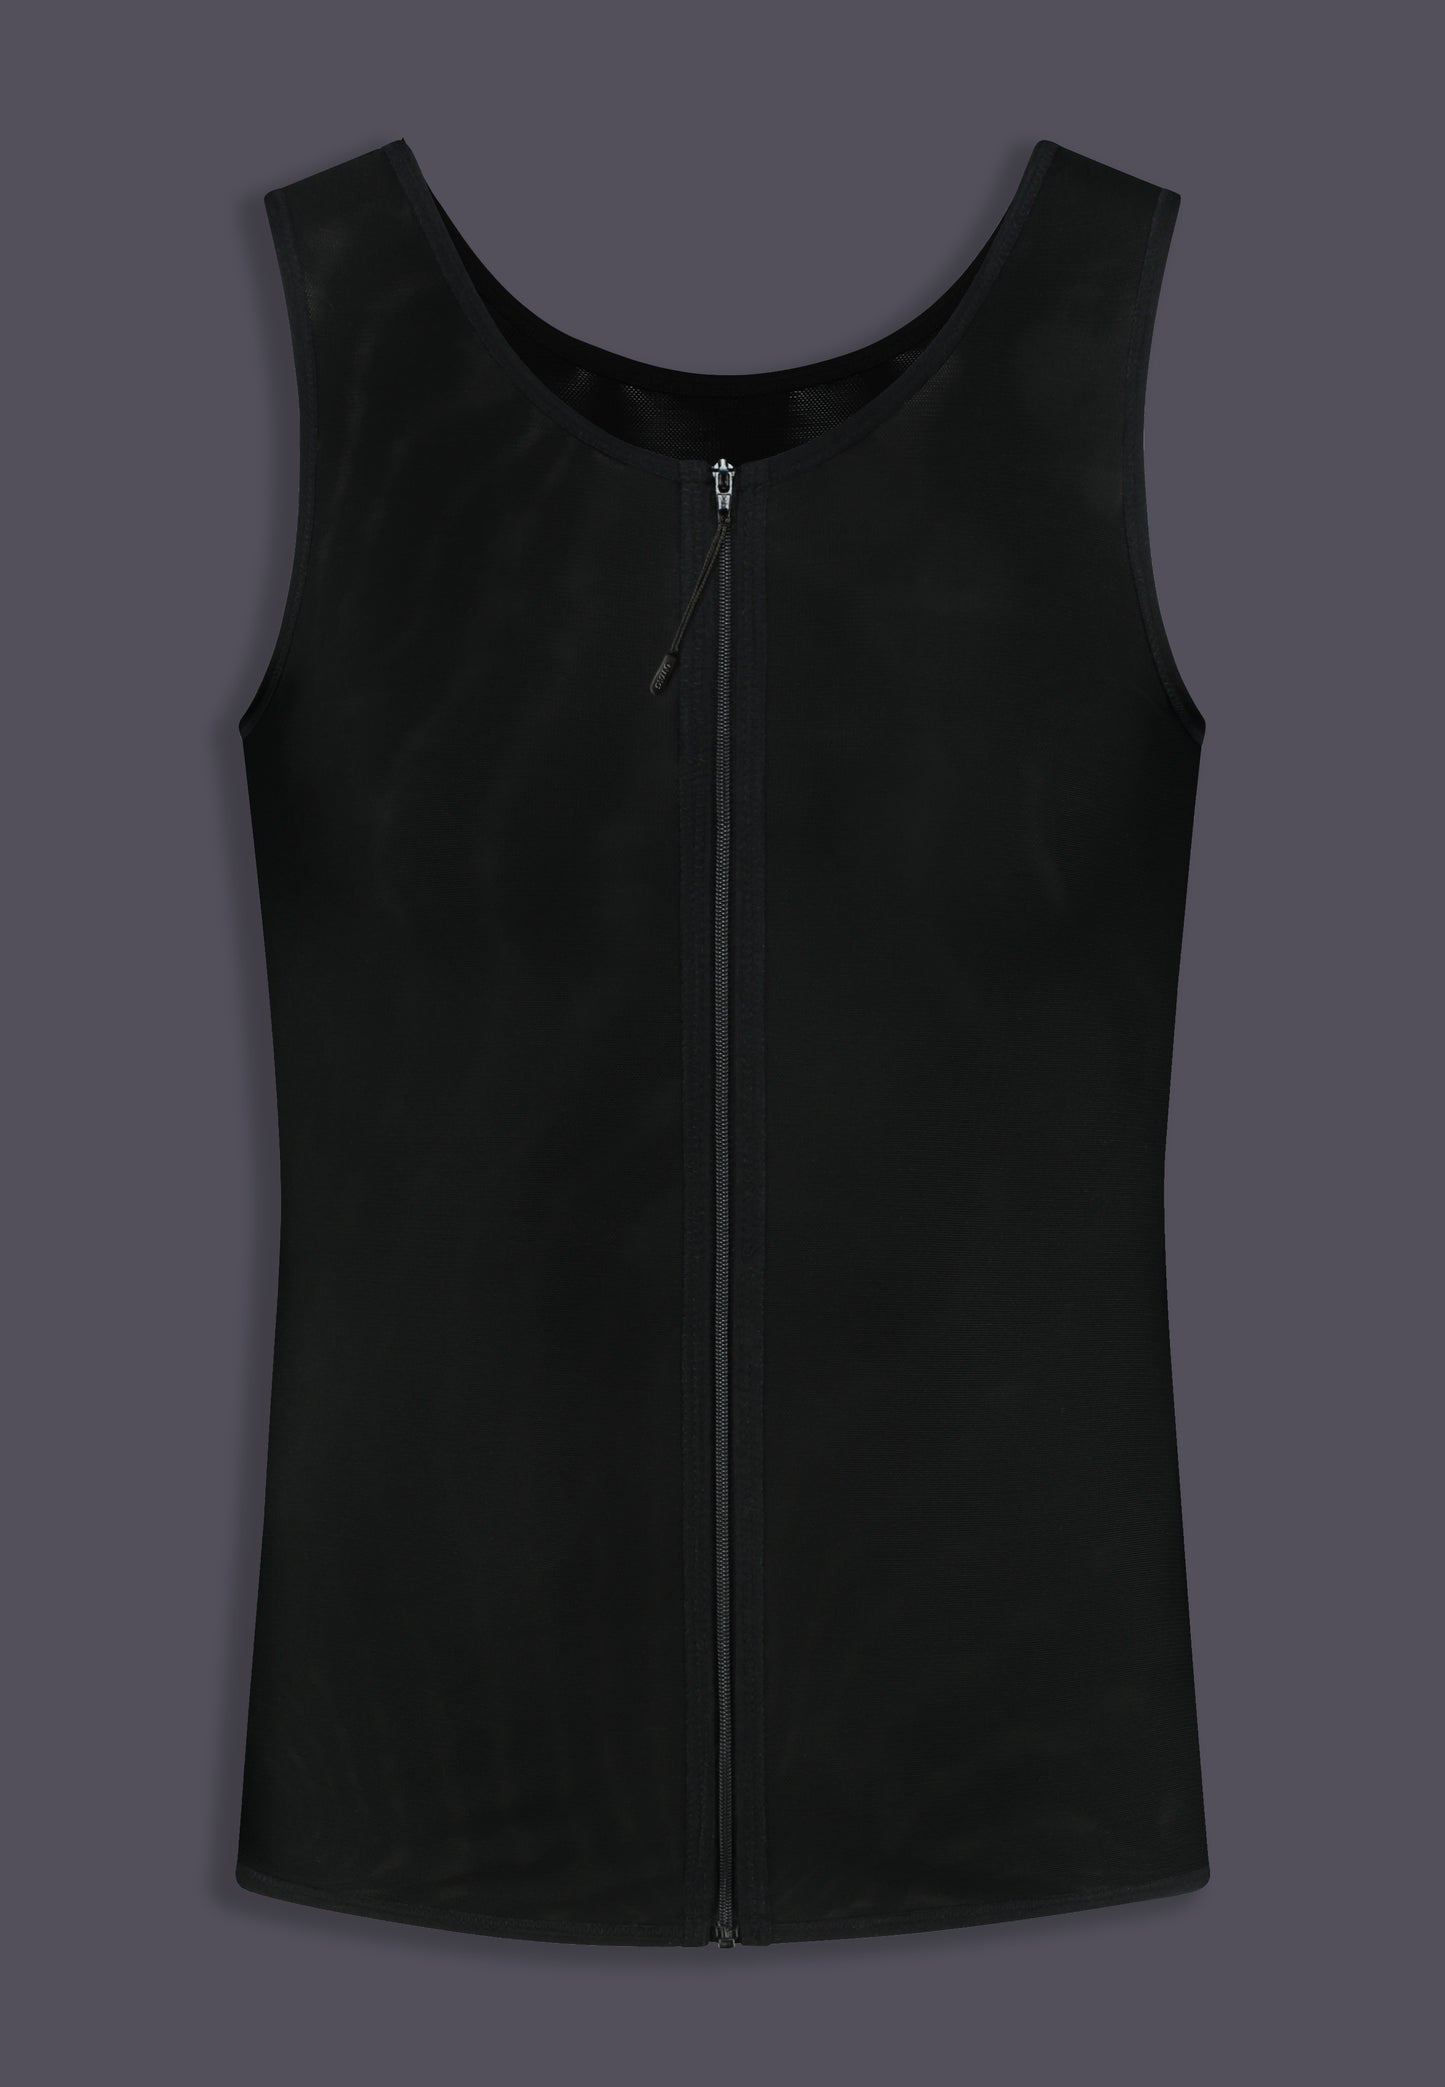 Singlet Binder with zipper in black front view by UNTAG